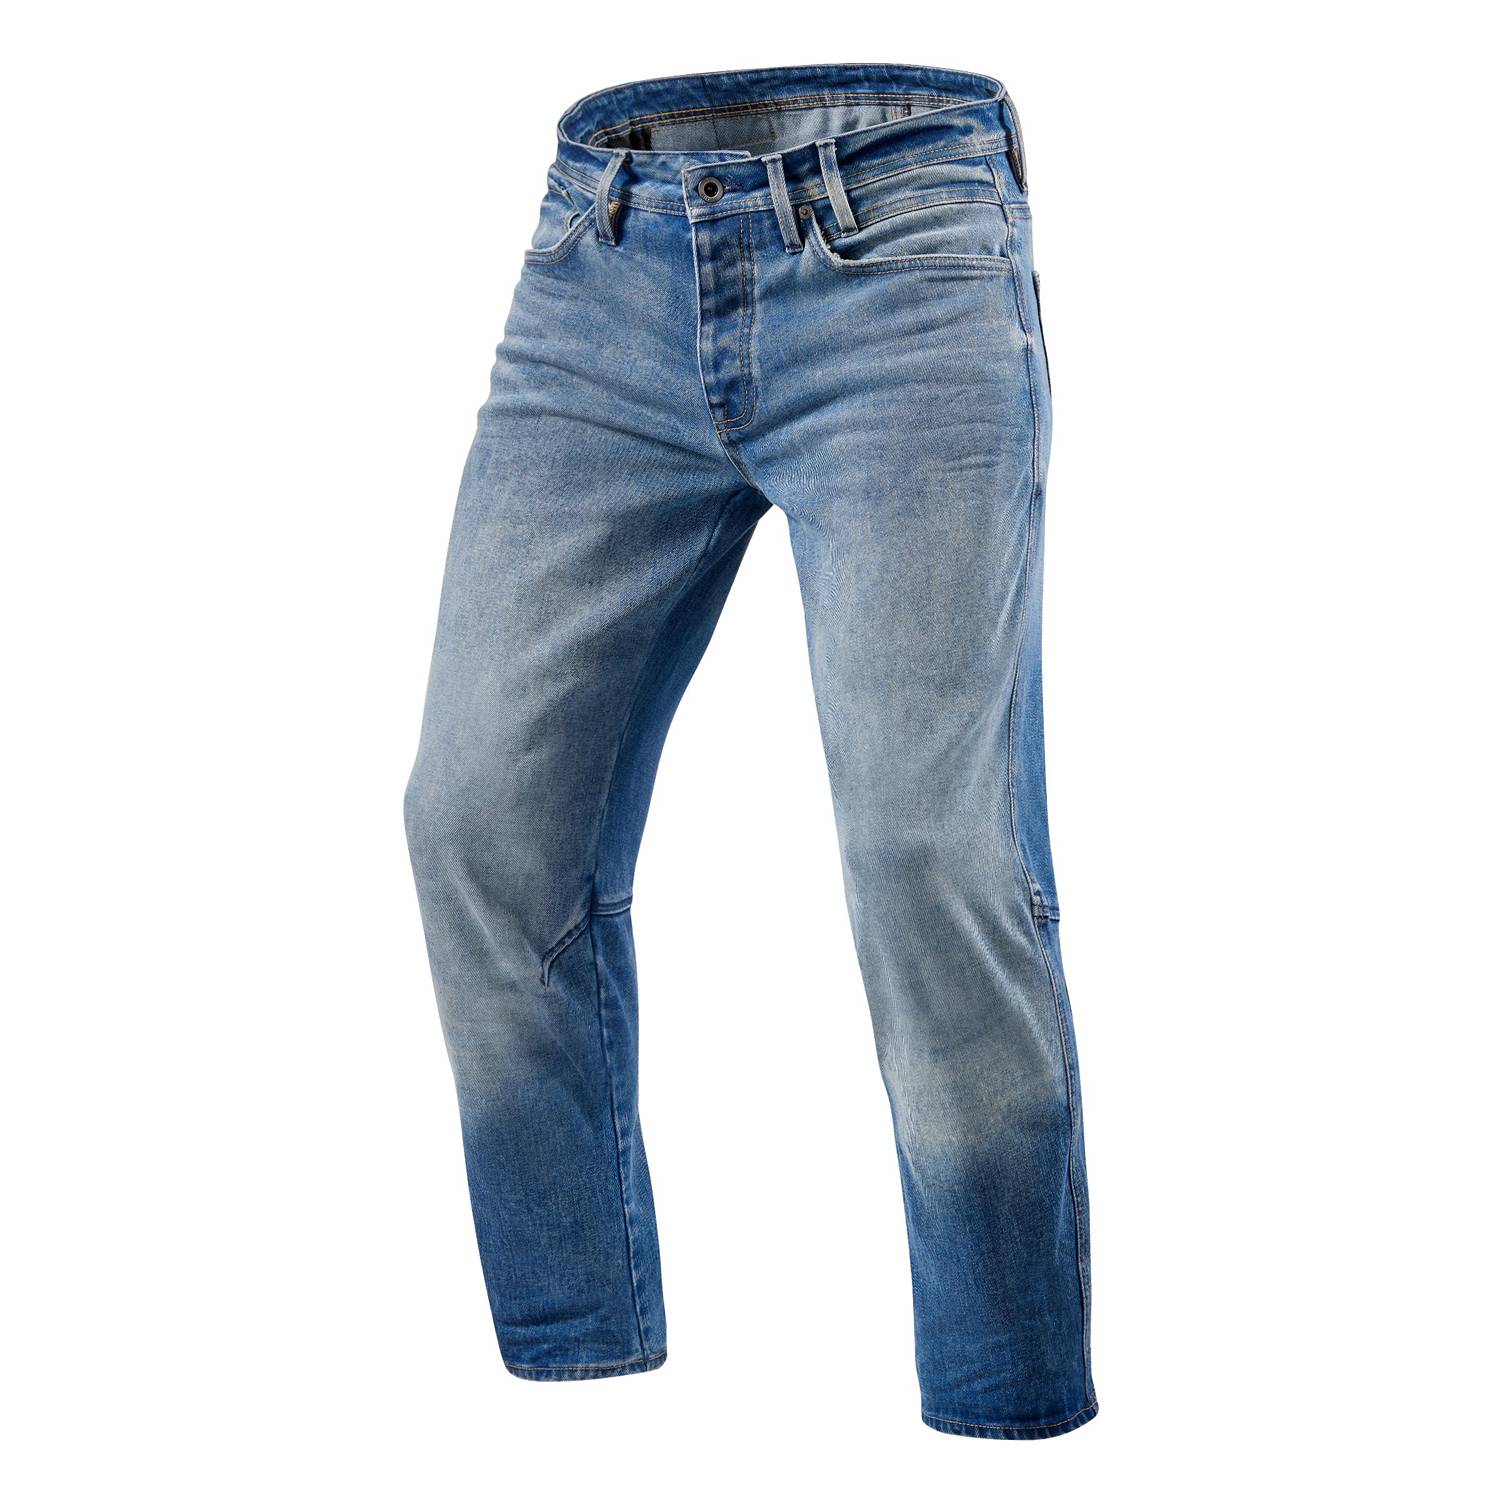 Image of REV'IT! Salt TF Mid Blue Used Motorcycle Jeans Talla L34/W31